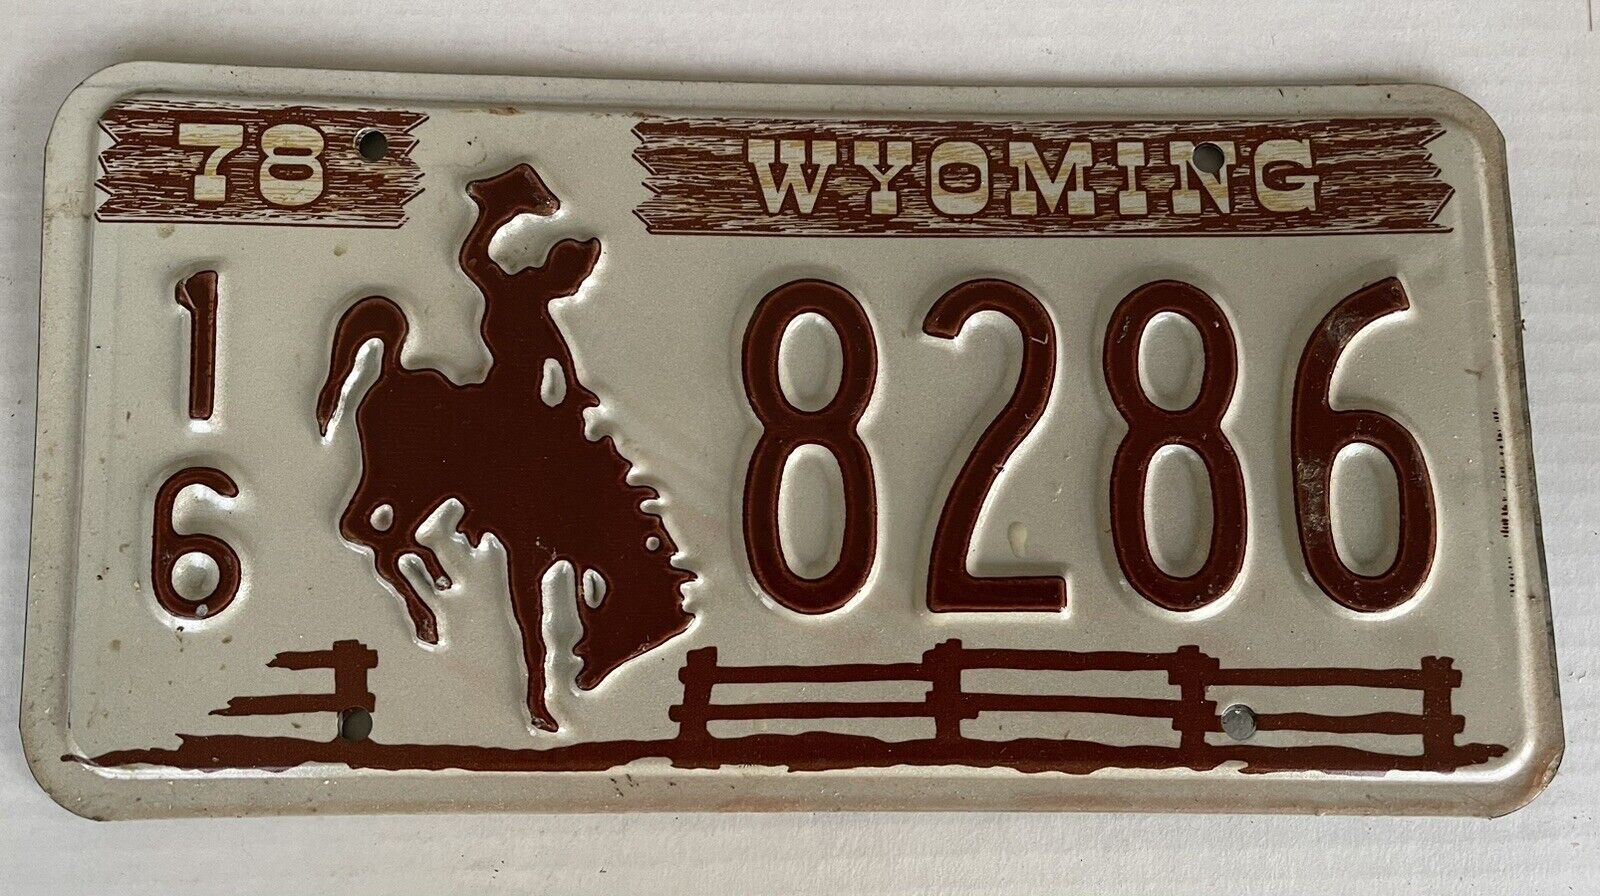 WYOMING 1978 License Plate 16 8286 Bucking Bronco  Vintage New Old Stock